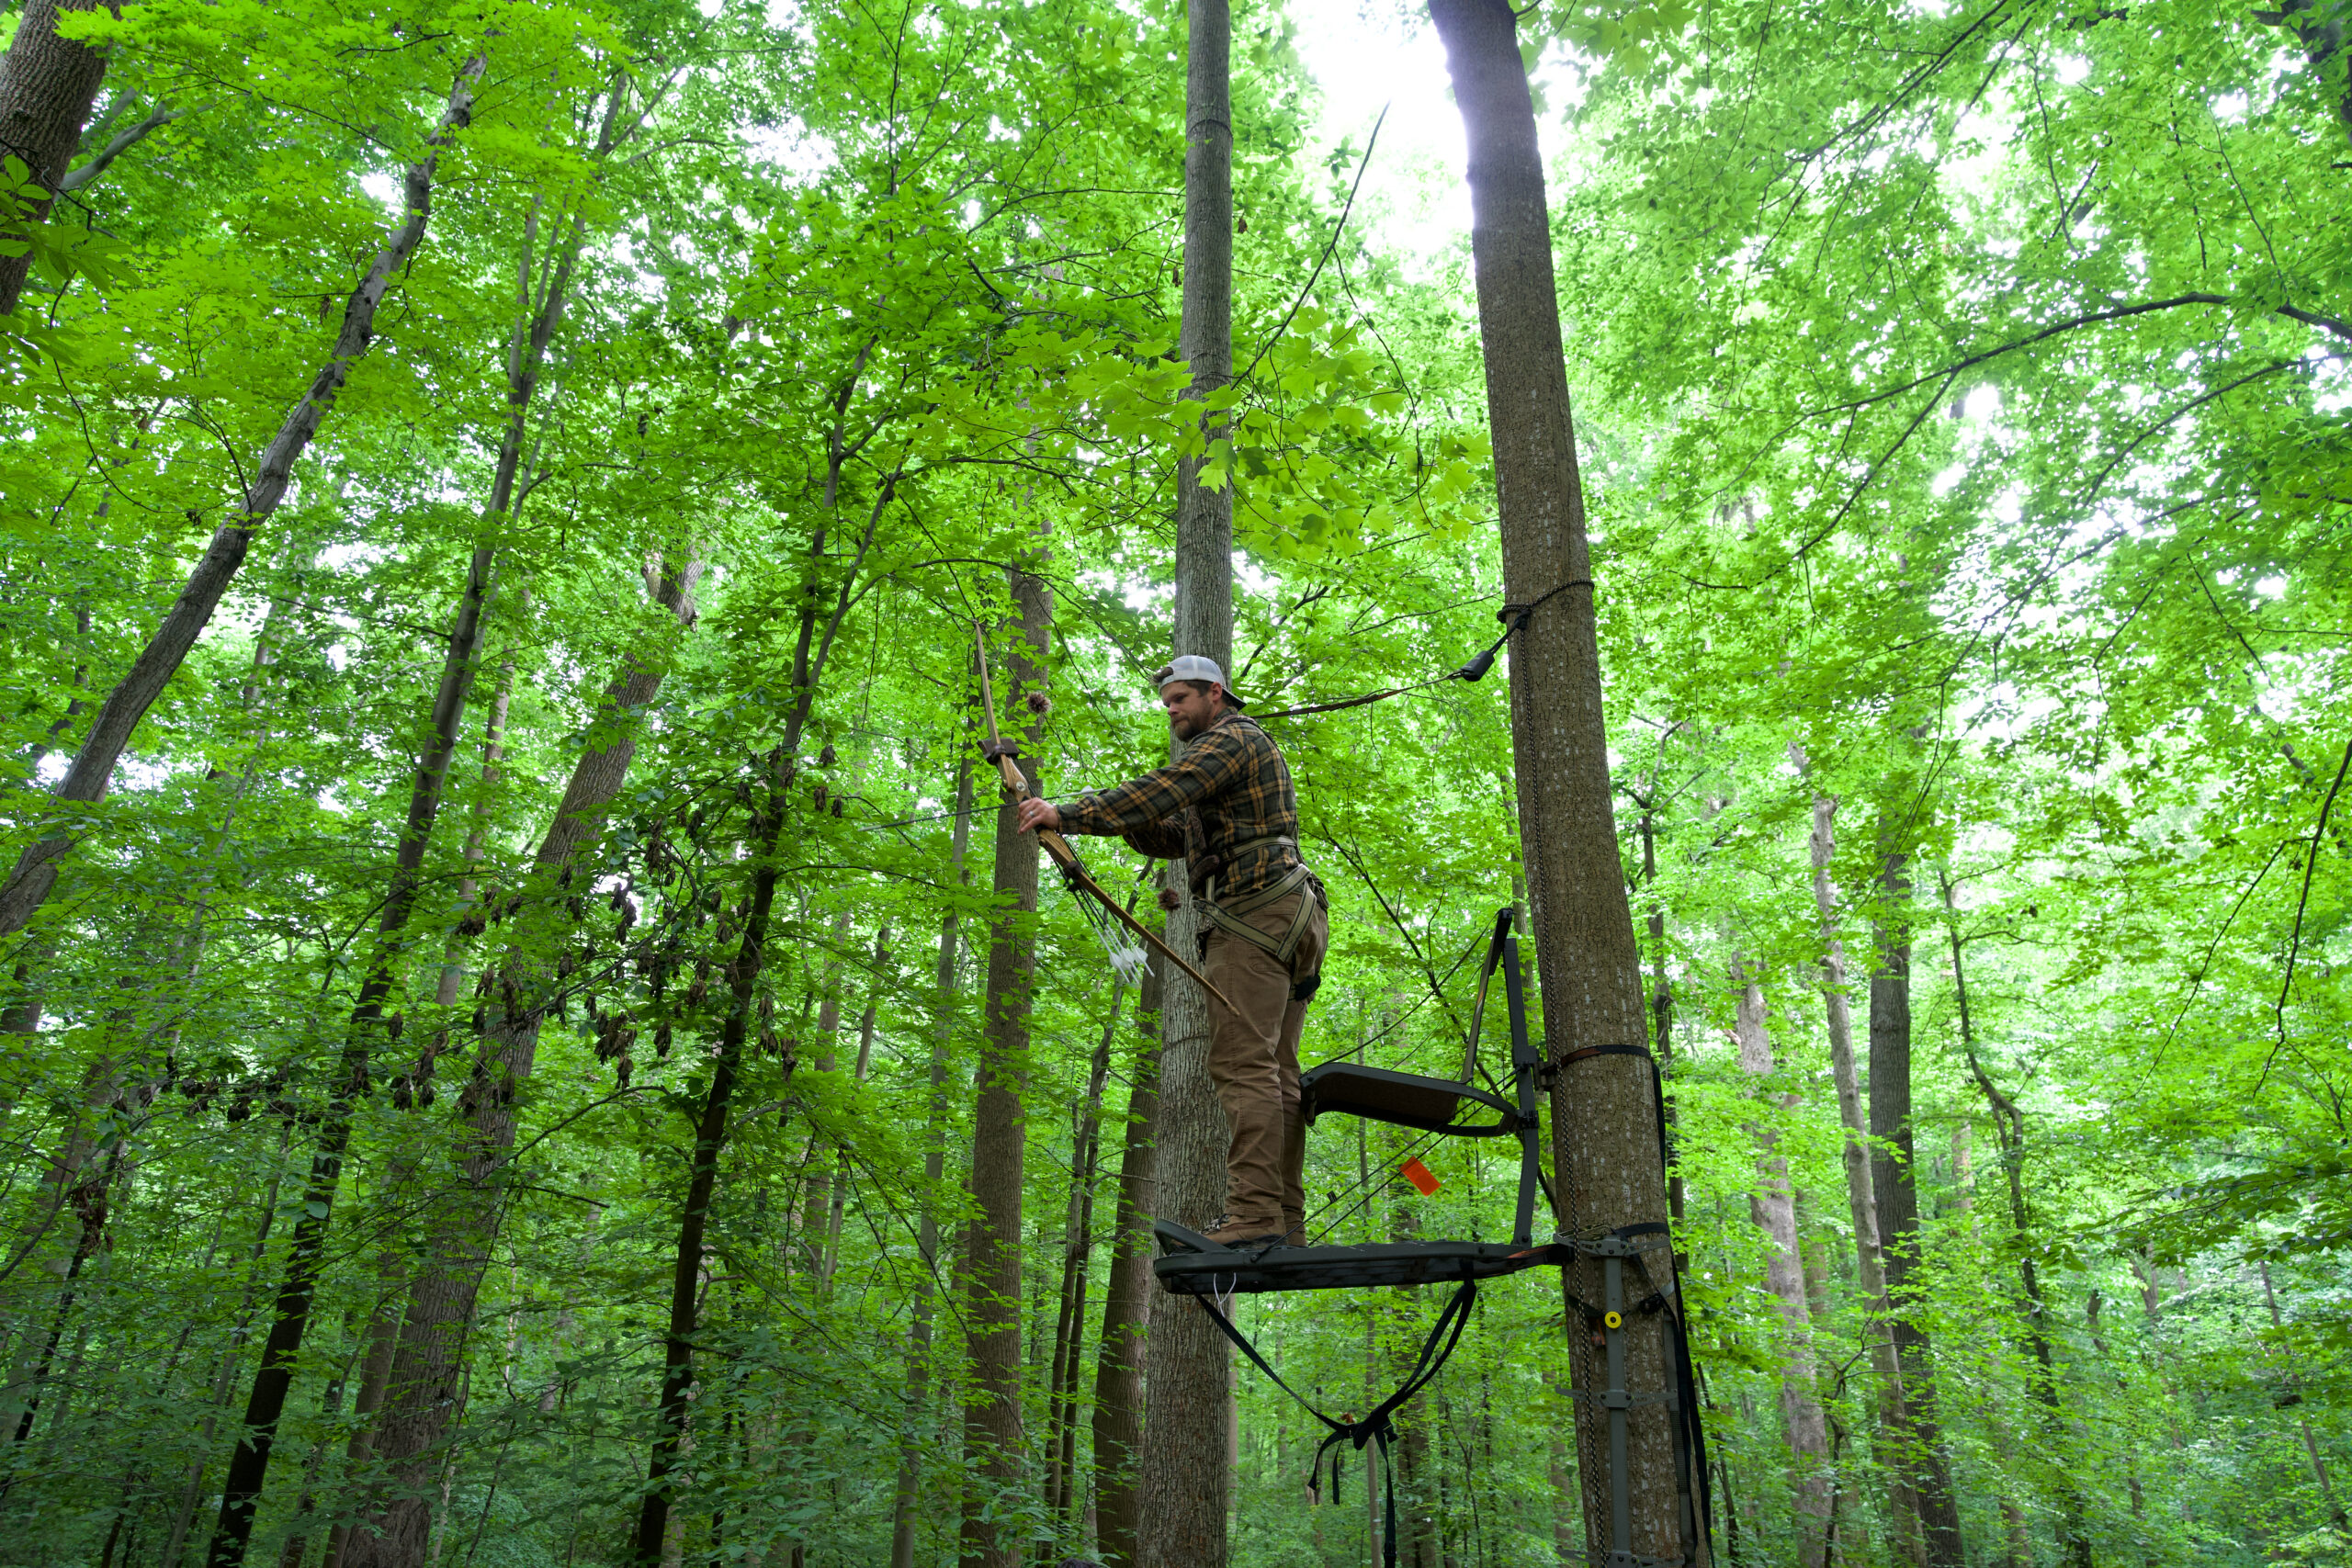 The Best Hang-On Tree Stands of 2023